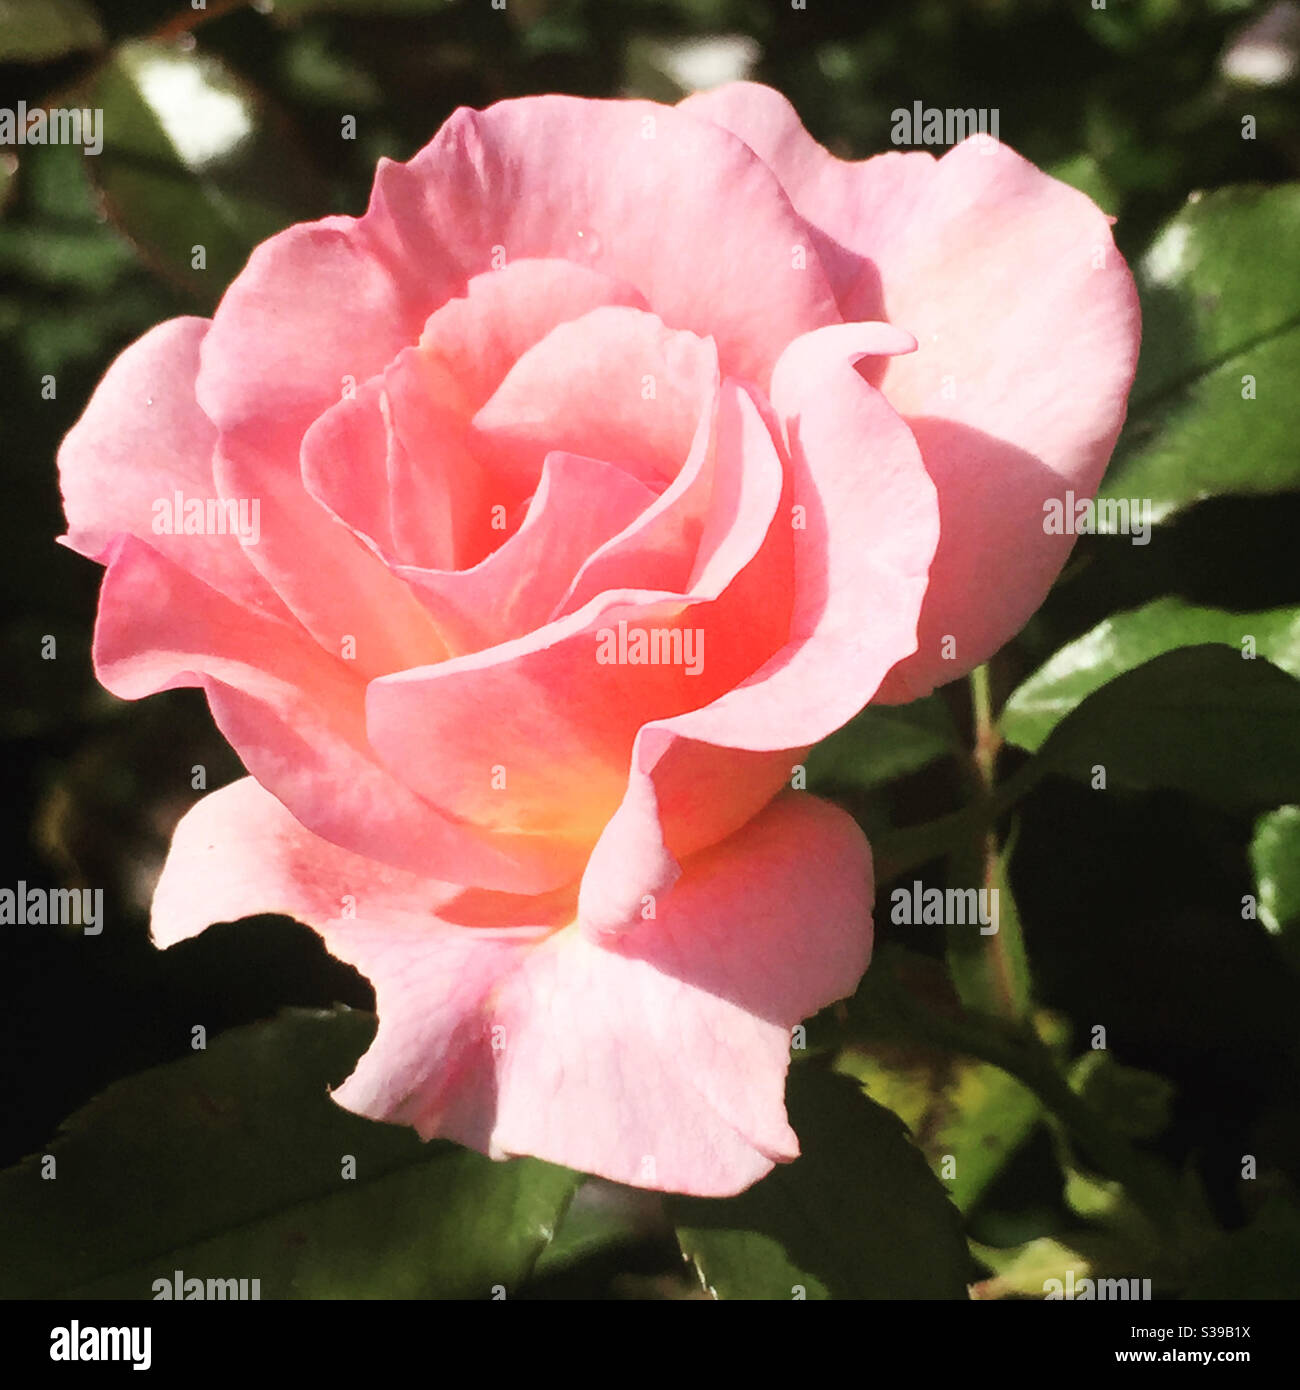 Pink rose flower close up Stock Photo